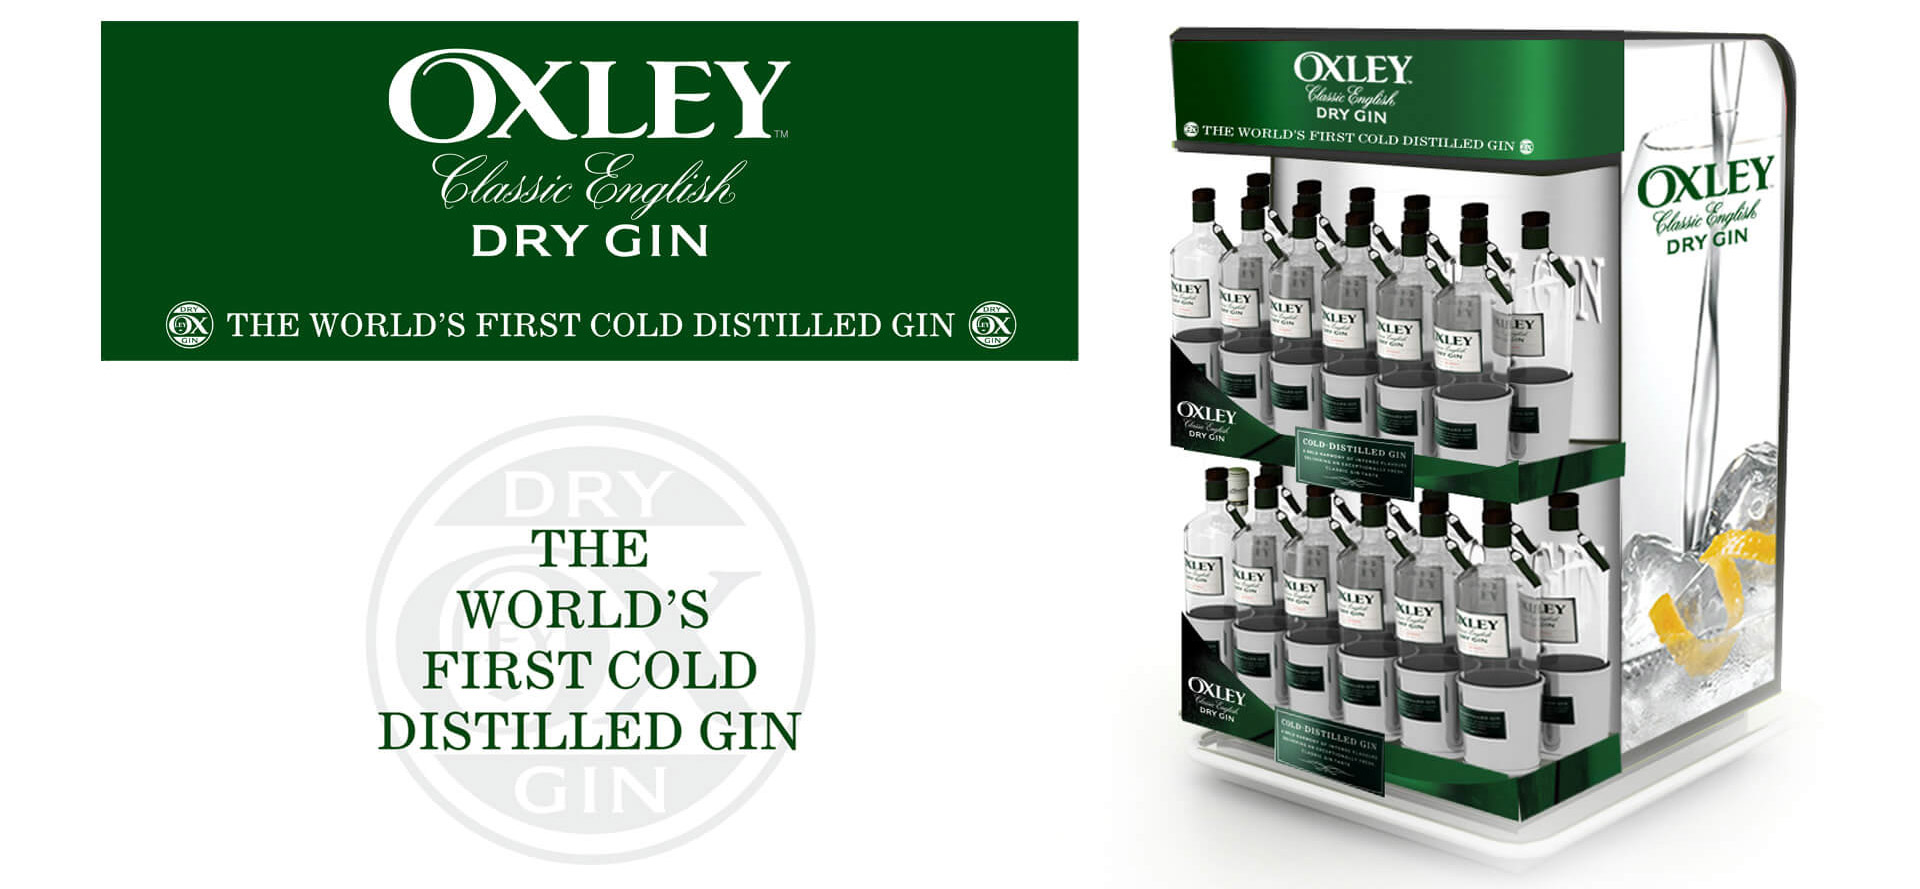 Oxley Gin brand identity and roller bar merchandising promotion travel retail for Bacardi Global Travel Retail